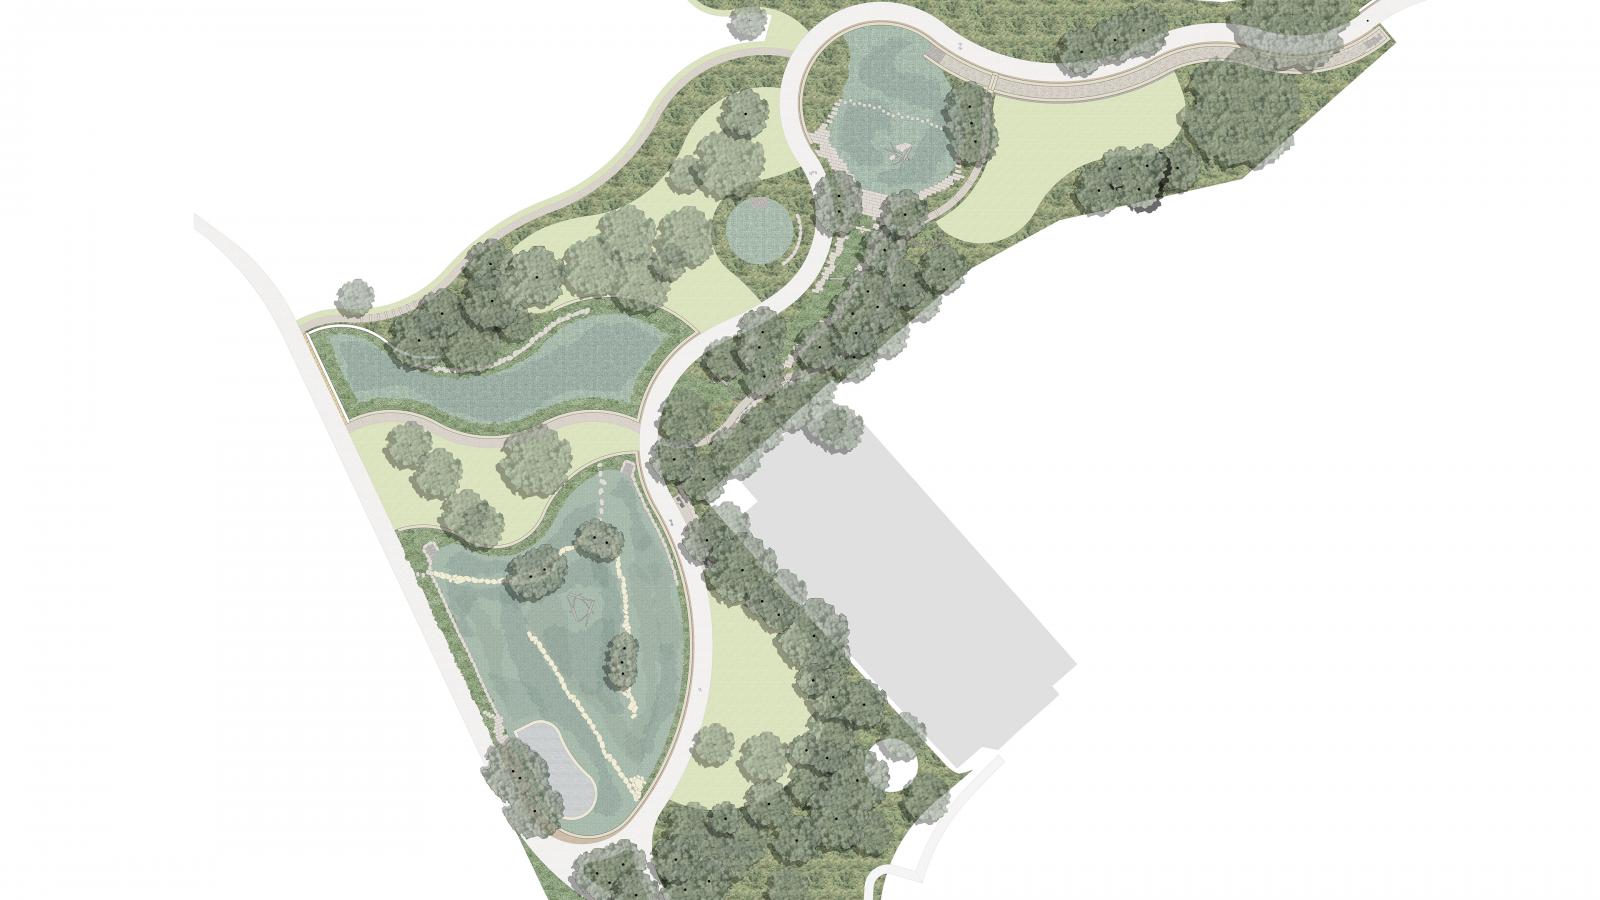 A landscape architectural site plan depicts a park with winding pathways, various green spaces, and tree clusters. Two pond-like water features enhance the natural beauty and align with Sydney Waterways health initiatives. A large, undefined gray area on the right likely represents a building.